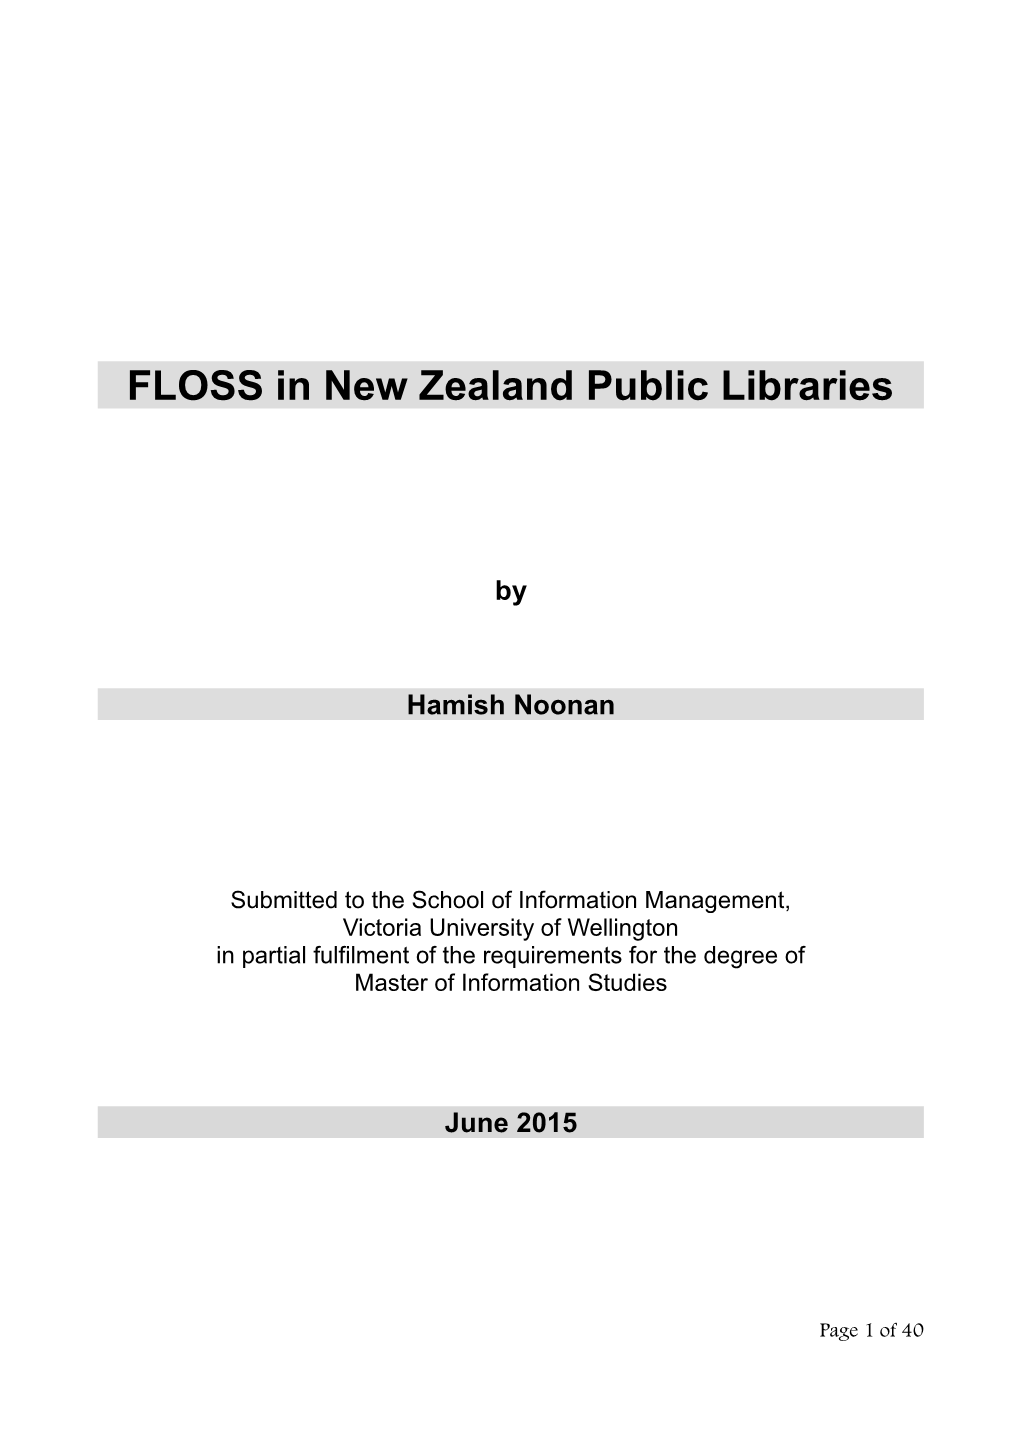 FLOSS in New Zealand Public Libraries